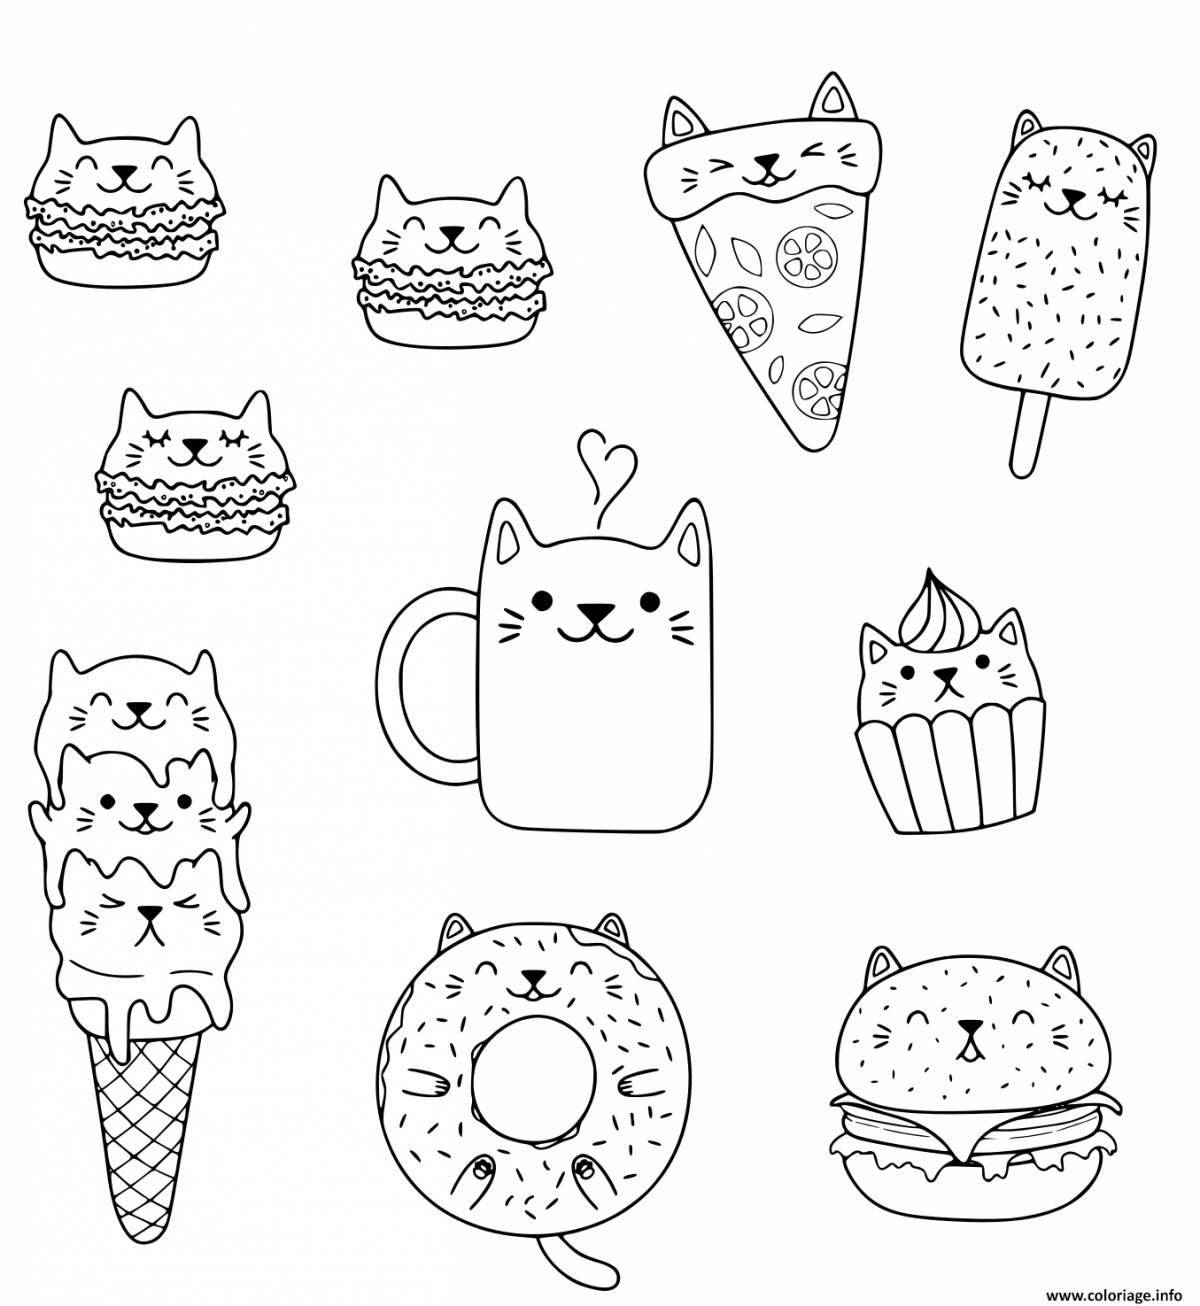 Naughty donut cat coloring page